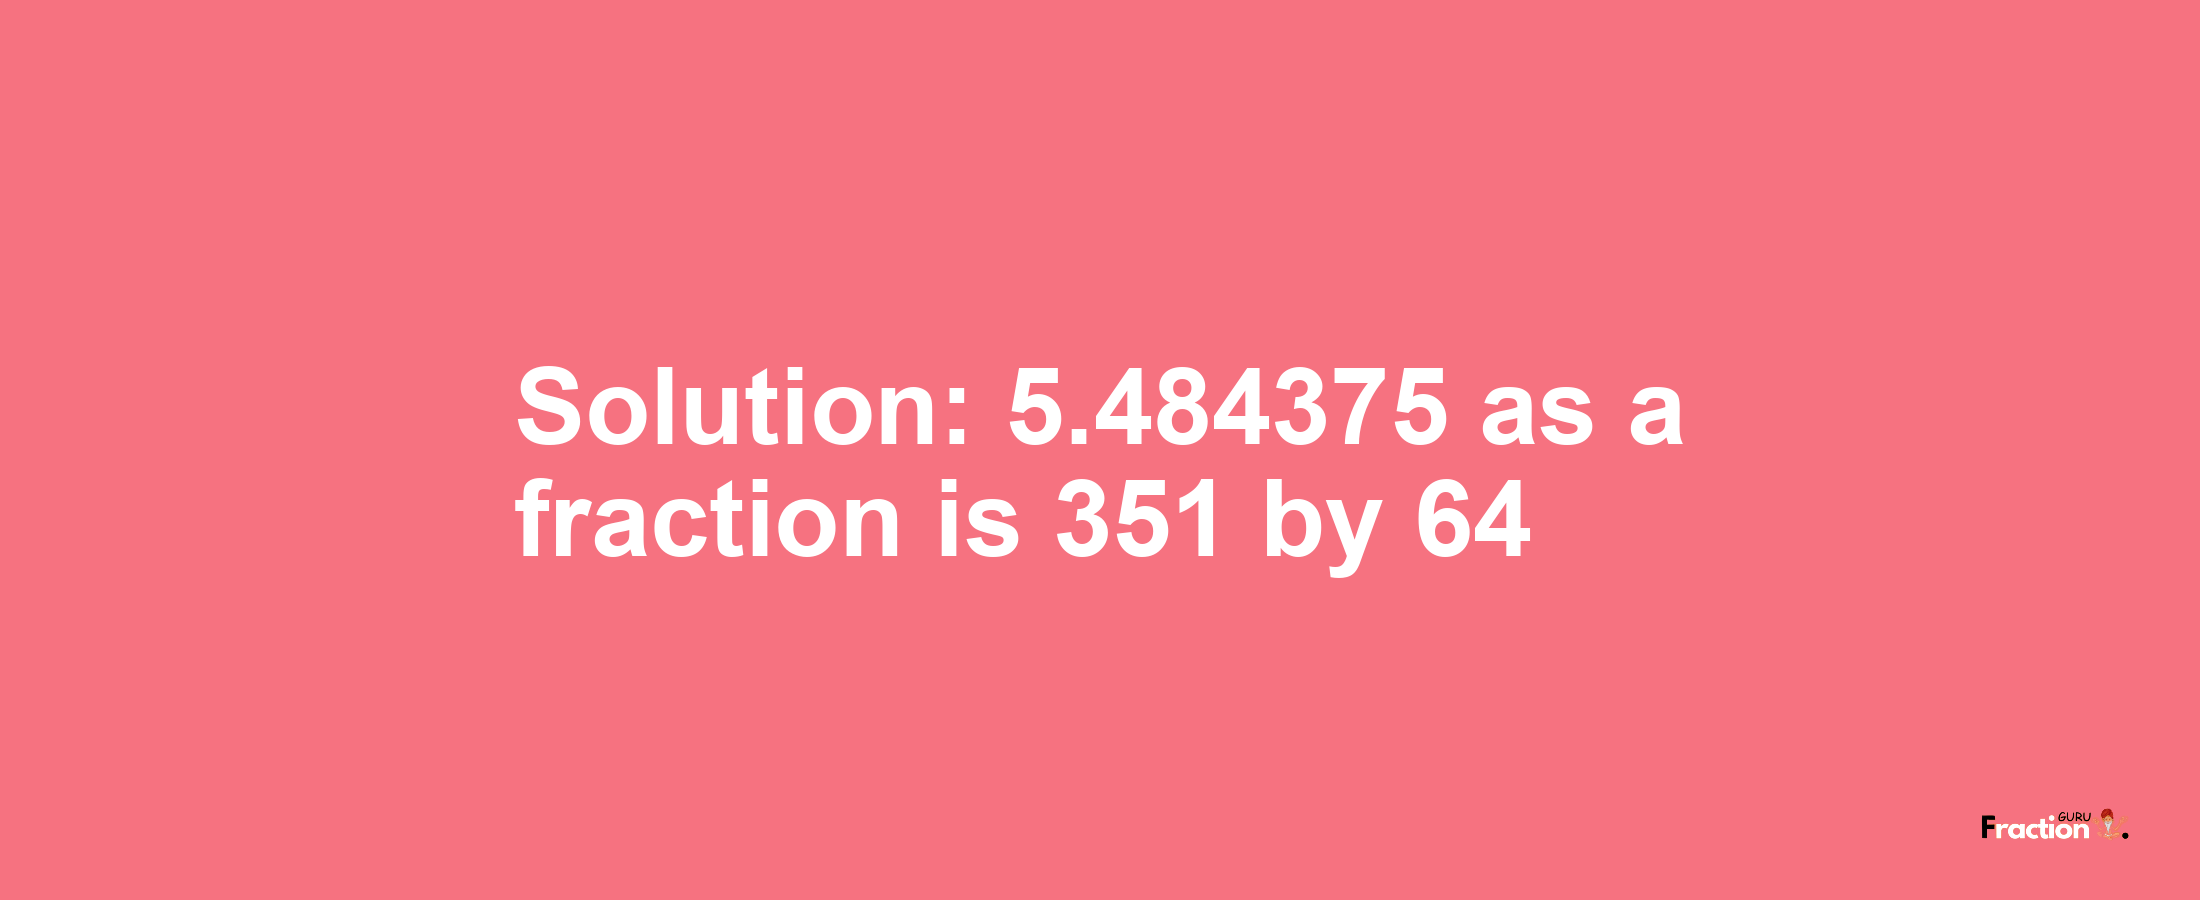 Solution:5.484375 as a fraction is 351/64